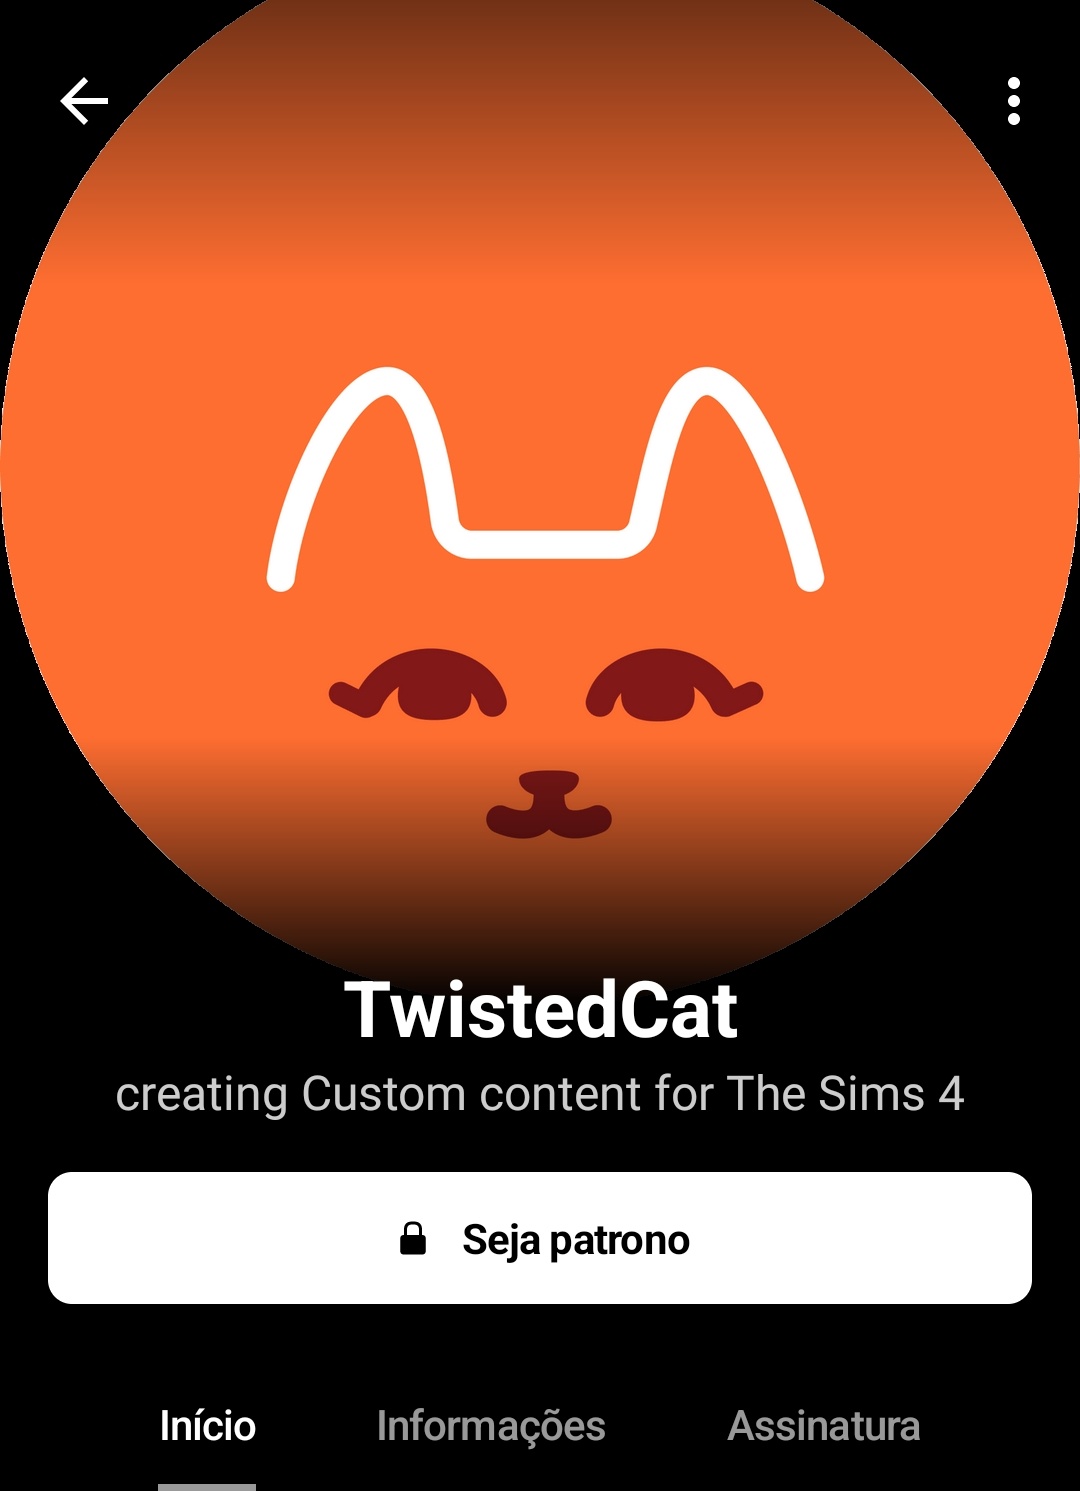 TwistedCat, creating Custom content for The Sims 4